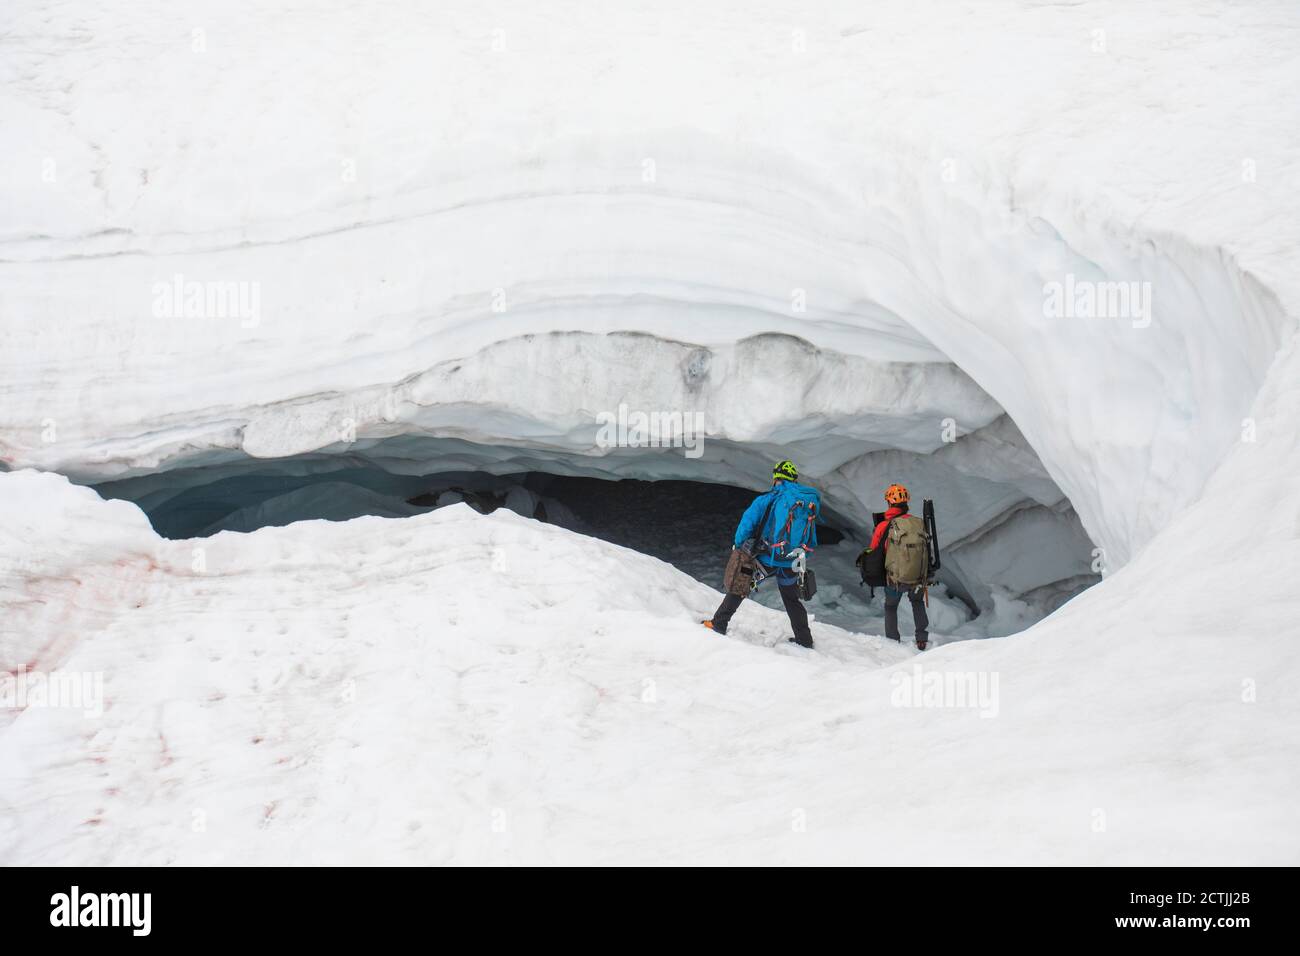 Two explorers enter the mouth of a glacial cave with gear in hand. Stock Photo